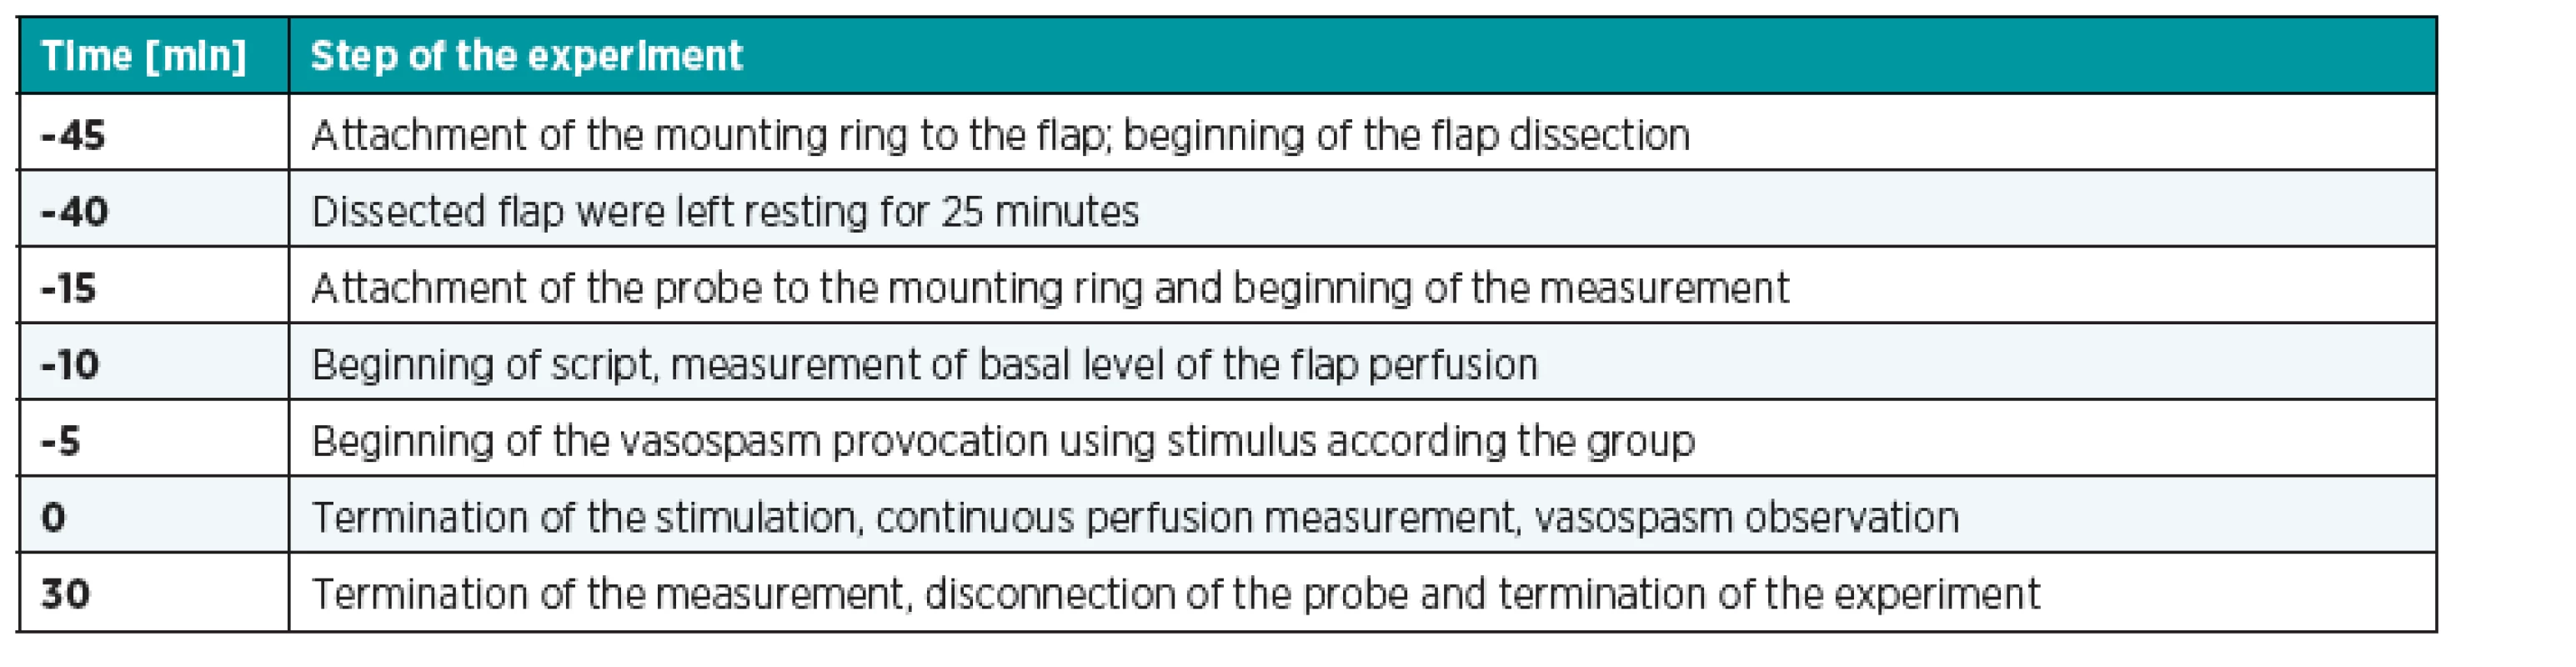 Timing of the experiment. Time t=0 was defined as the end of the stimulus that provoked the vasospasm. From this point, the duration of the vasospasm was measured